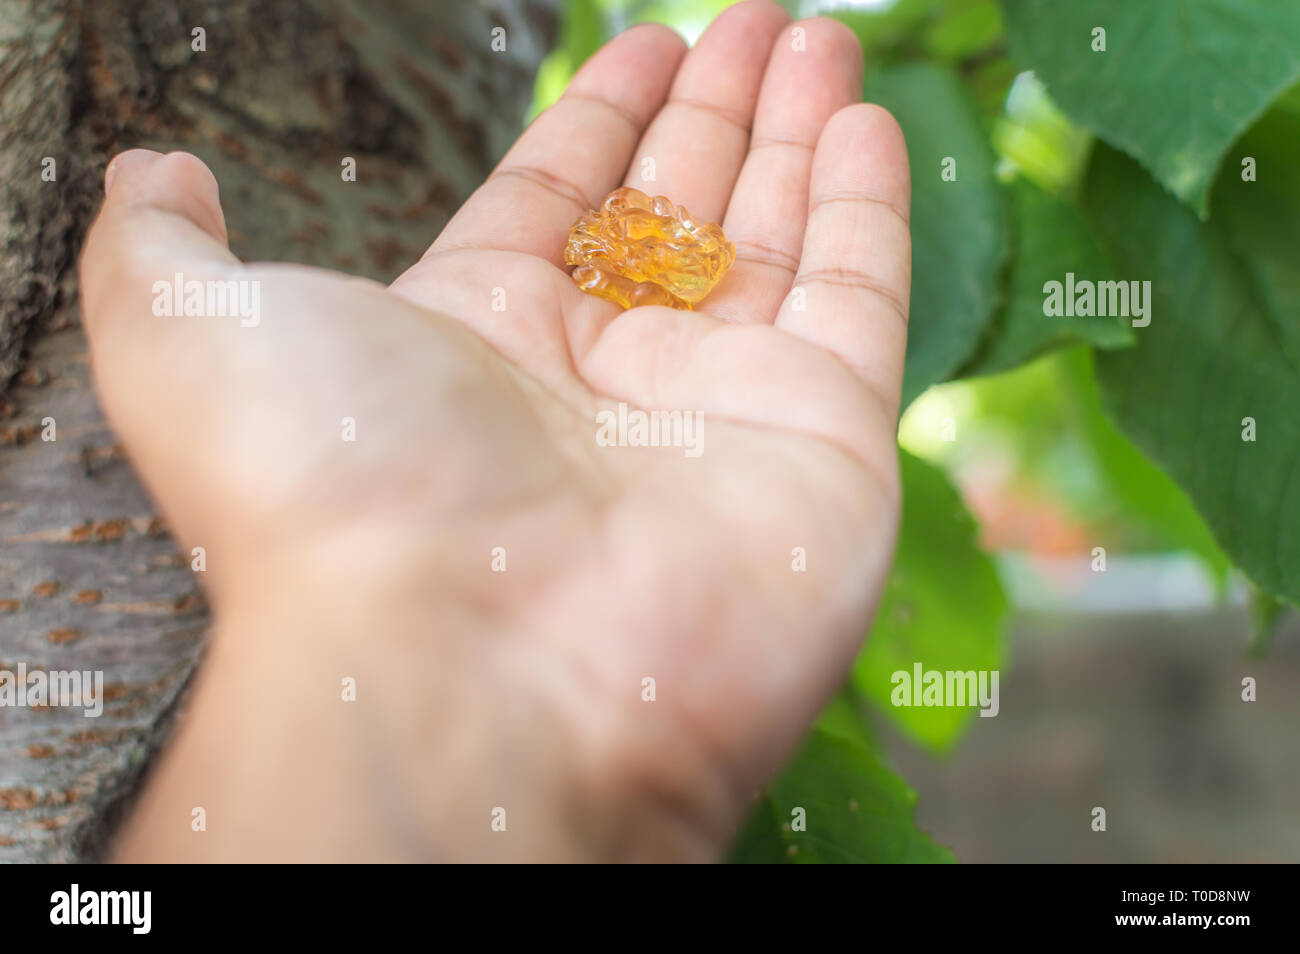 A person showing resins gums sap freshly plucked from a cherry tree bark Stock Photo